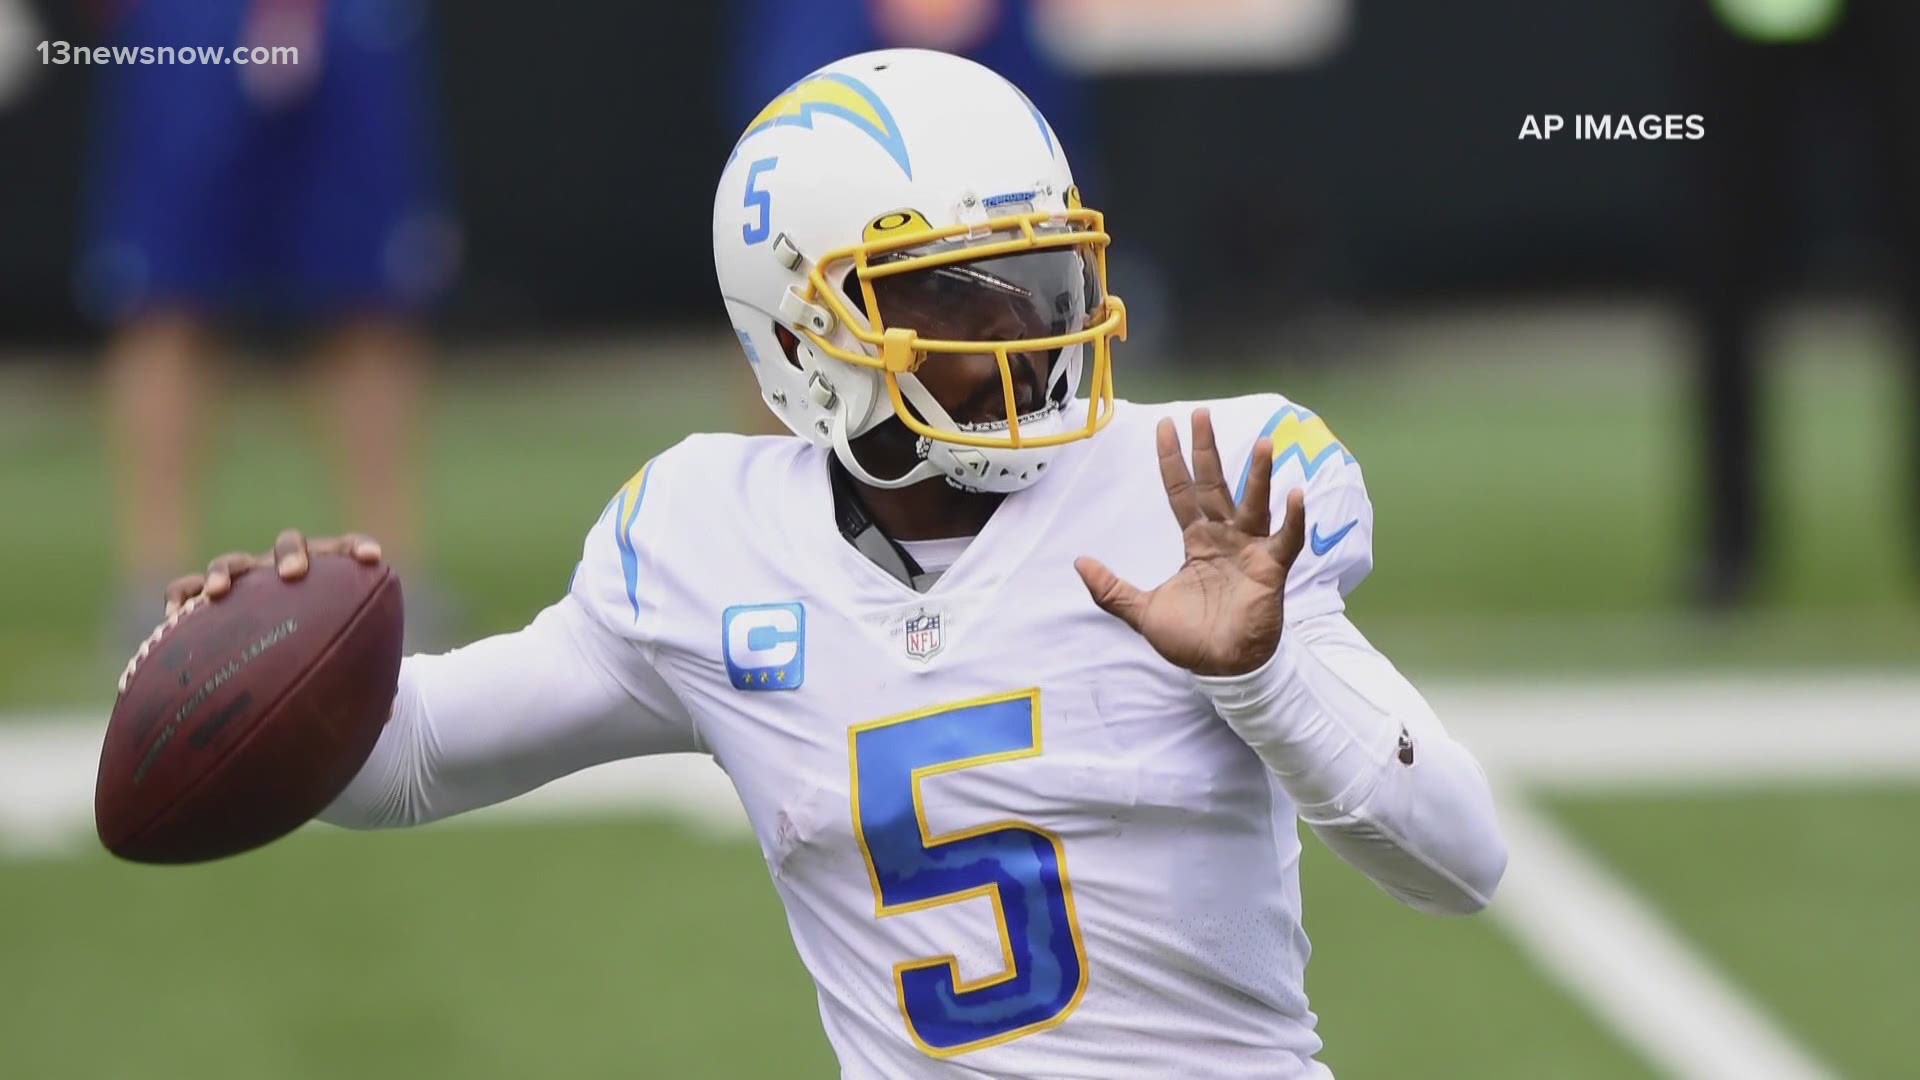 The NFL Players Association said on Wednesday that they have been in contact with Tyrod Taylor and his agent and have started an investigation into the matter.